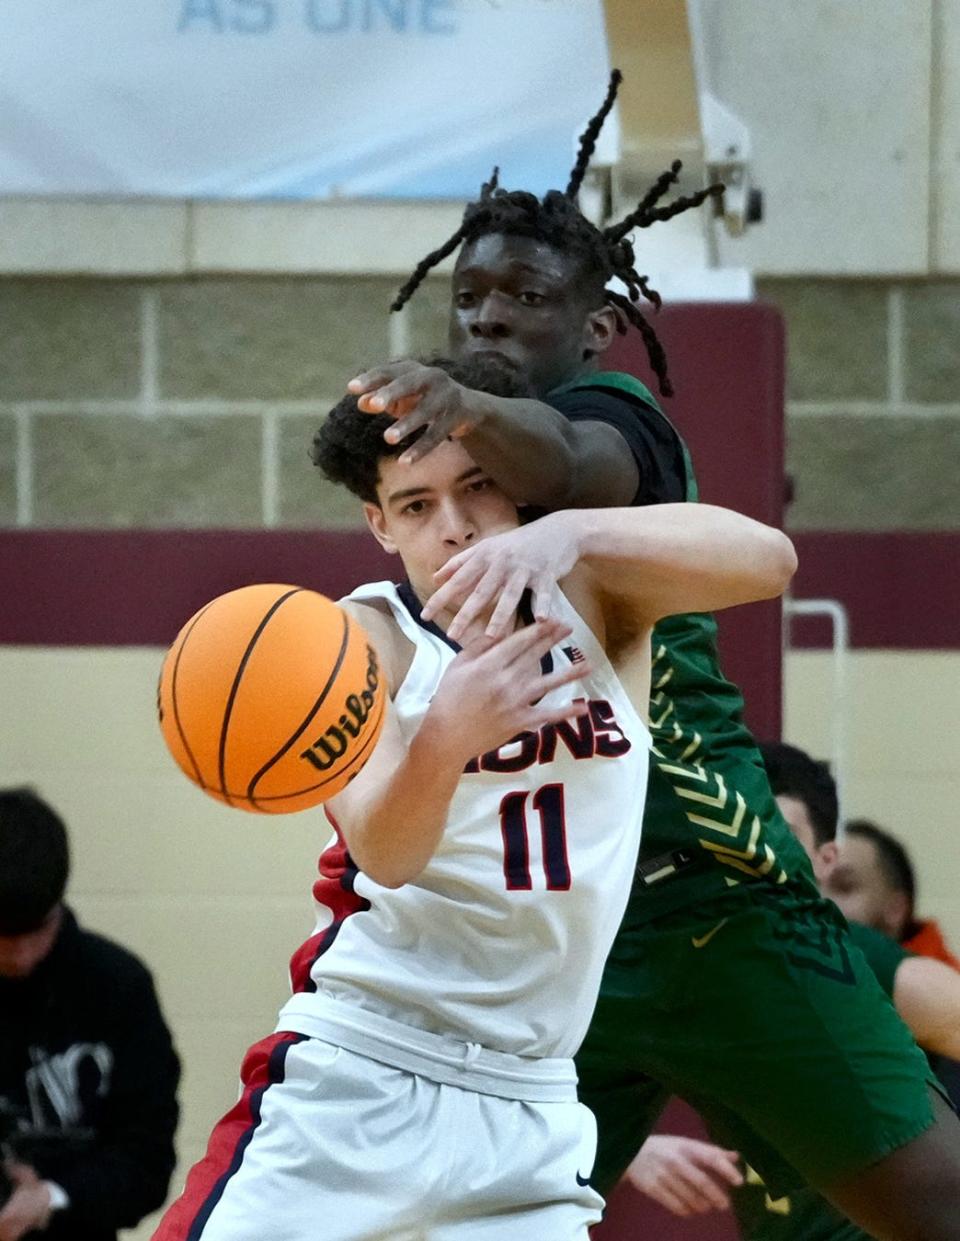 Austin Noel (11) and Lincoln took down Hendricken in the quarterfinals and are now prepared to battle another Division I power on Saturday at The Ryan Center in the RIIL Boys Basketball State Tournament semifinals.